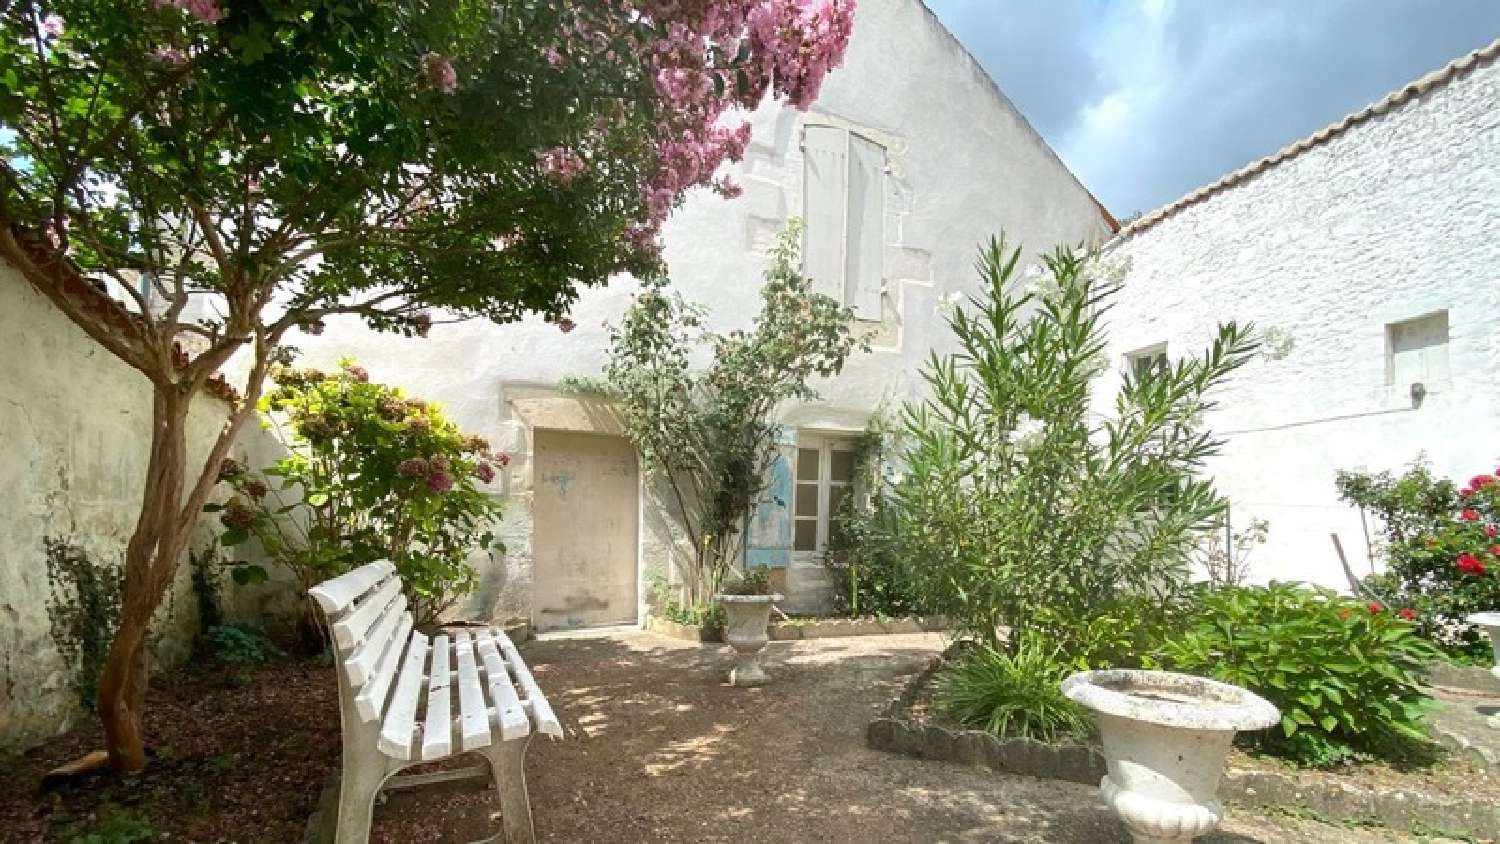  for sale village house Taillebourg Charente-Maritime 1